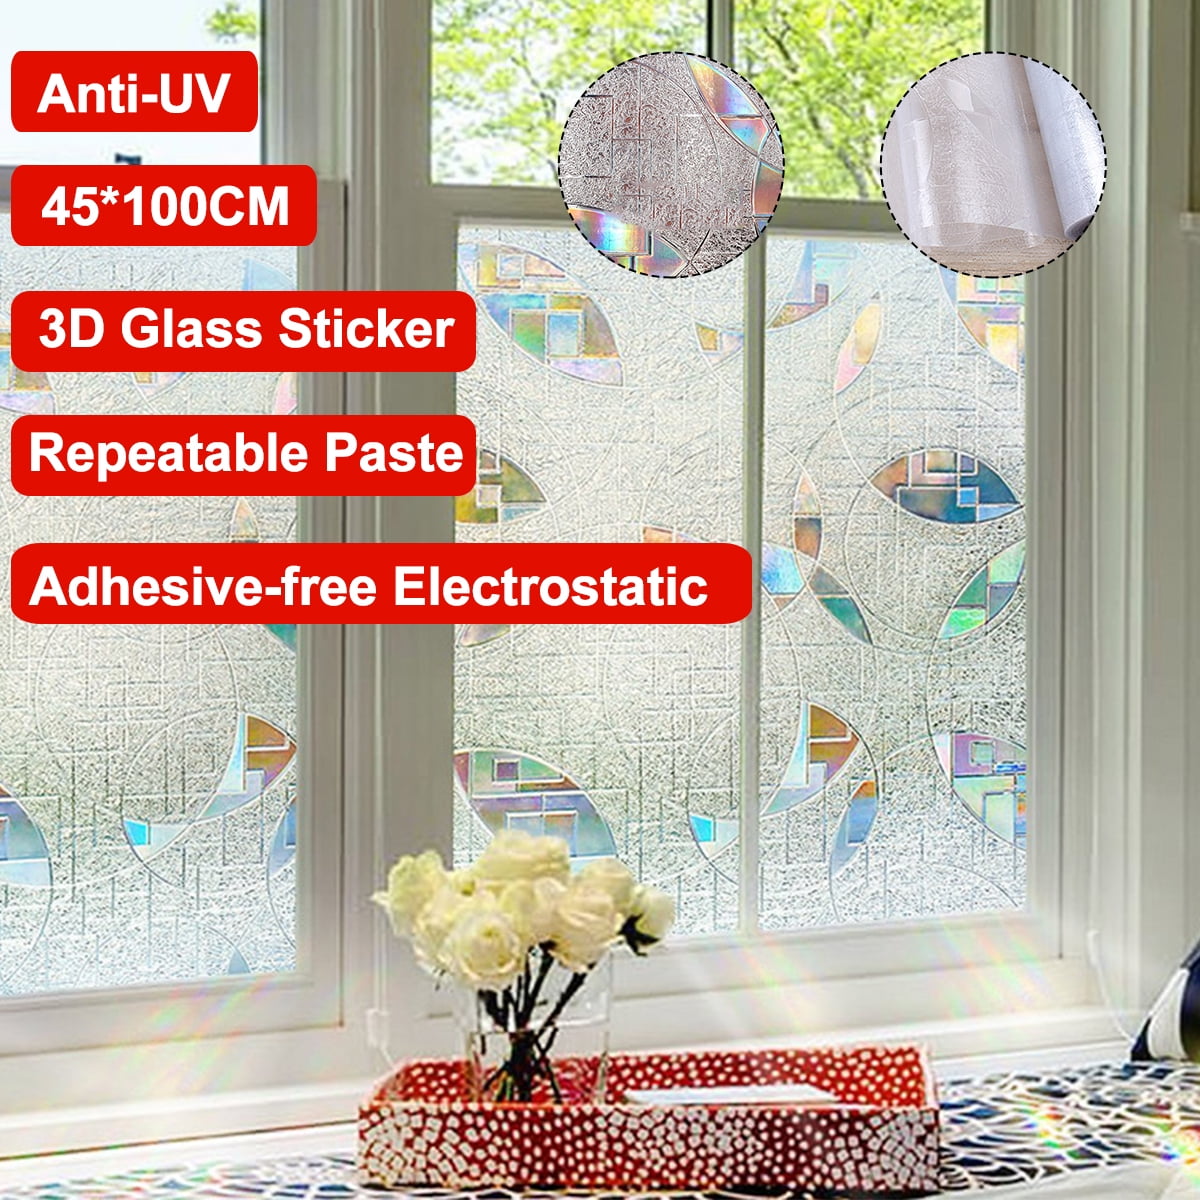 1Pcs 18"x35" 3D Privacy Window Films Frosted Film Sticker Non Adhesive Static Cling Reusable Glass Film for Home Office, Reusable Film